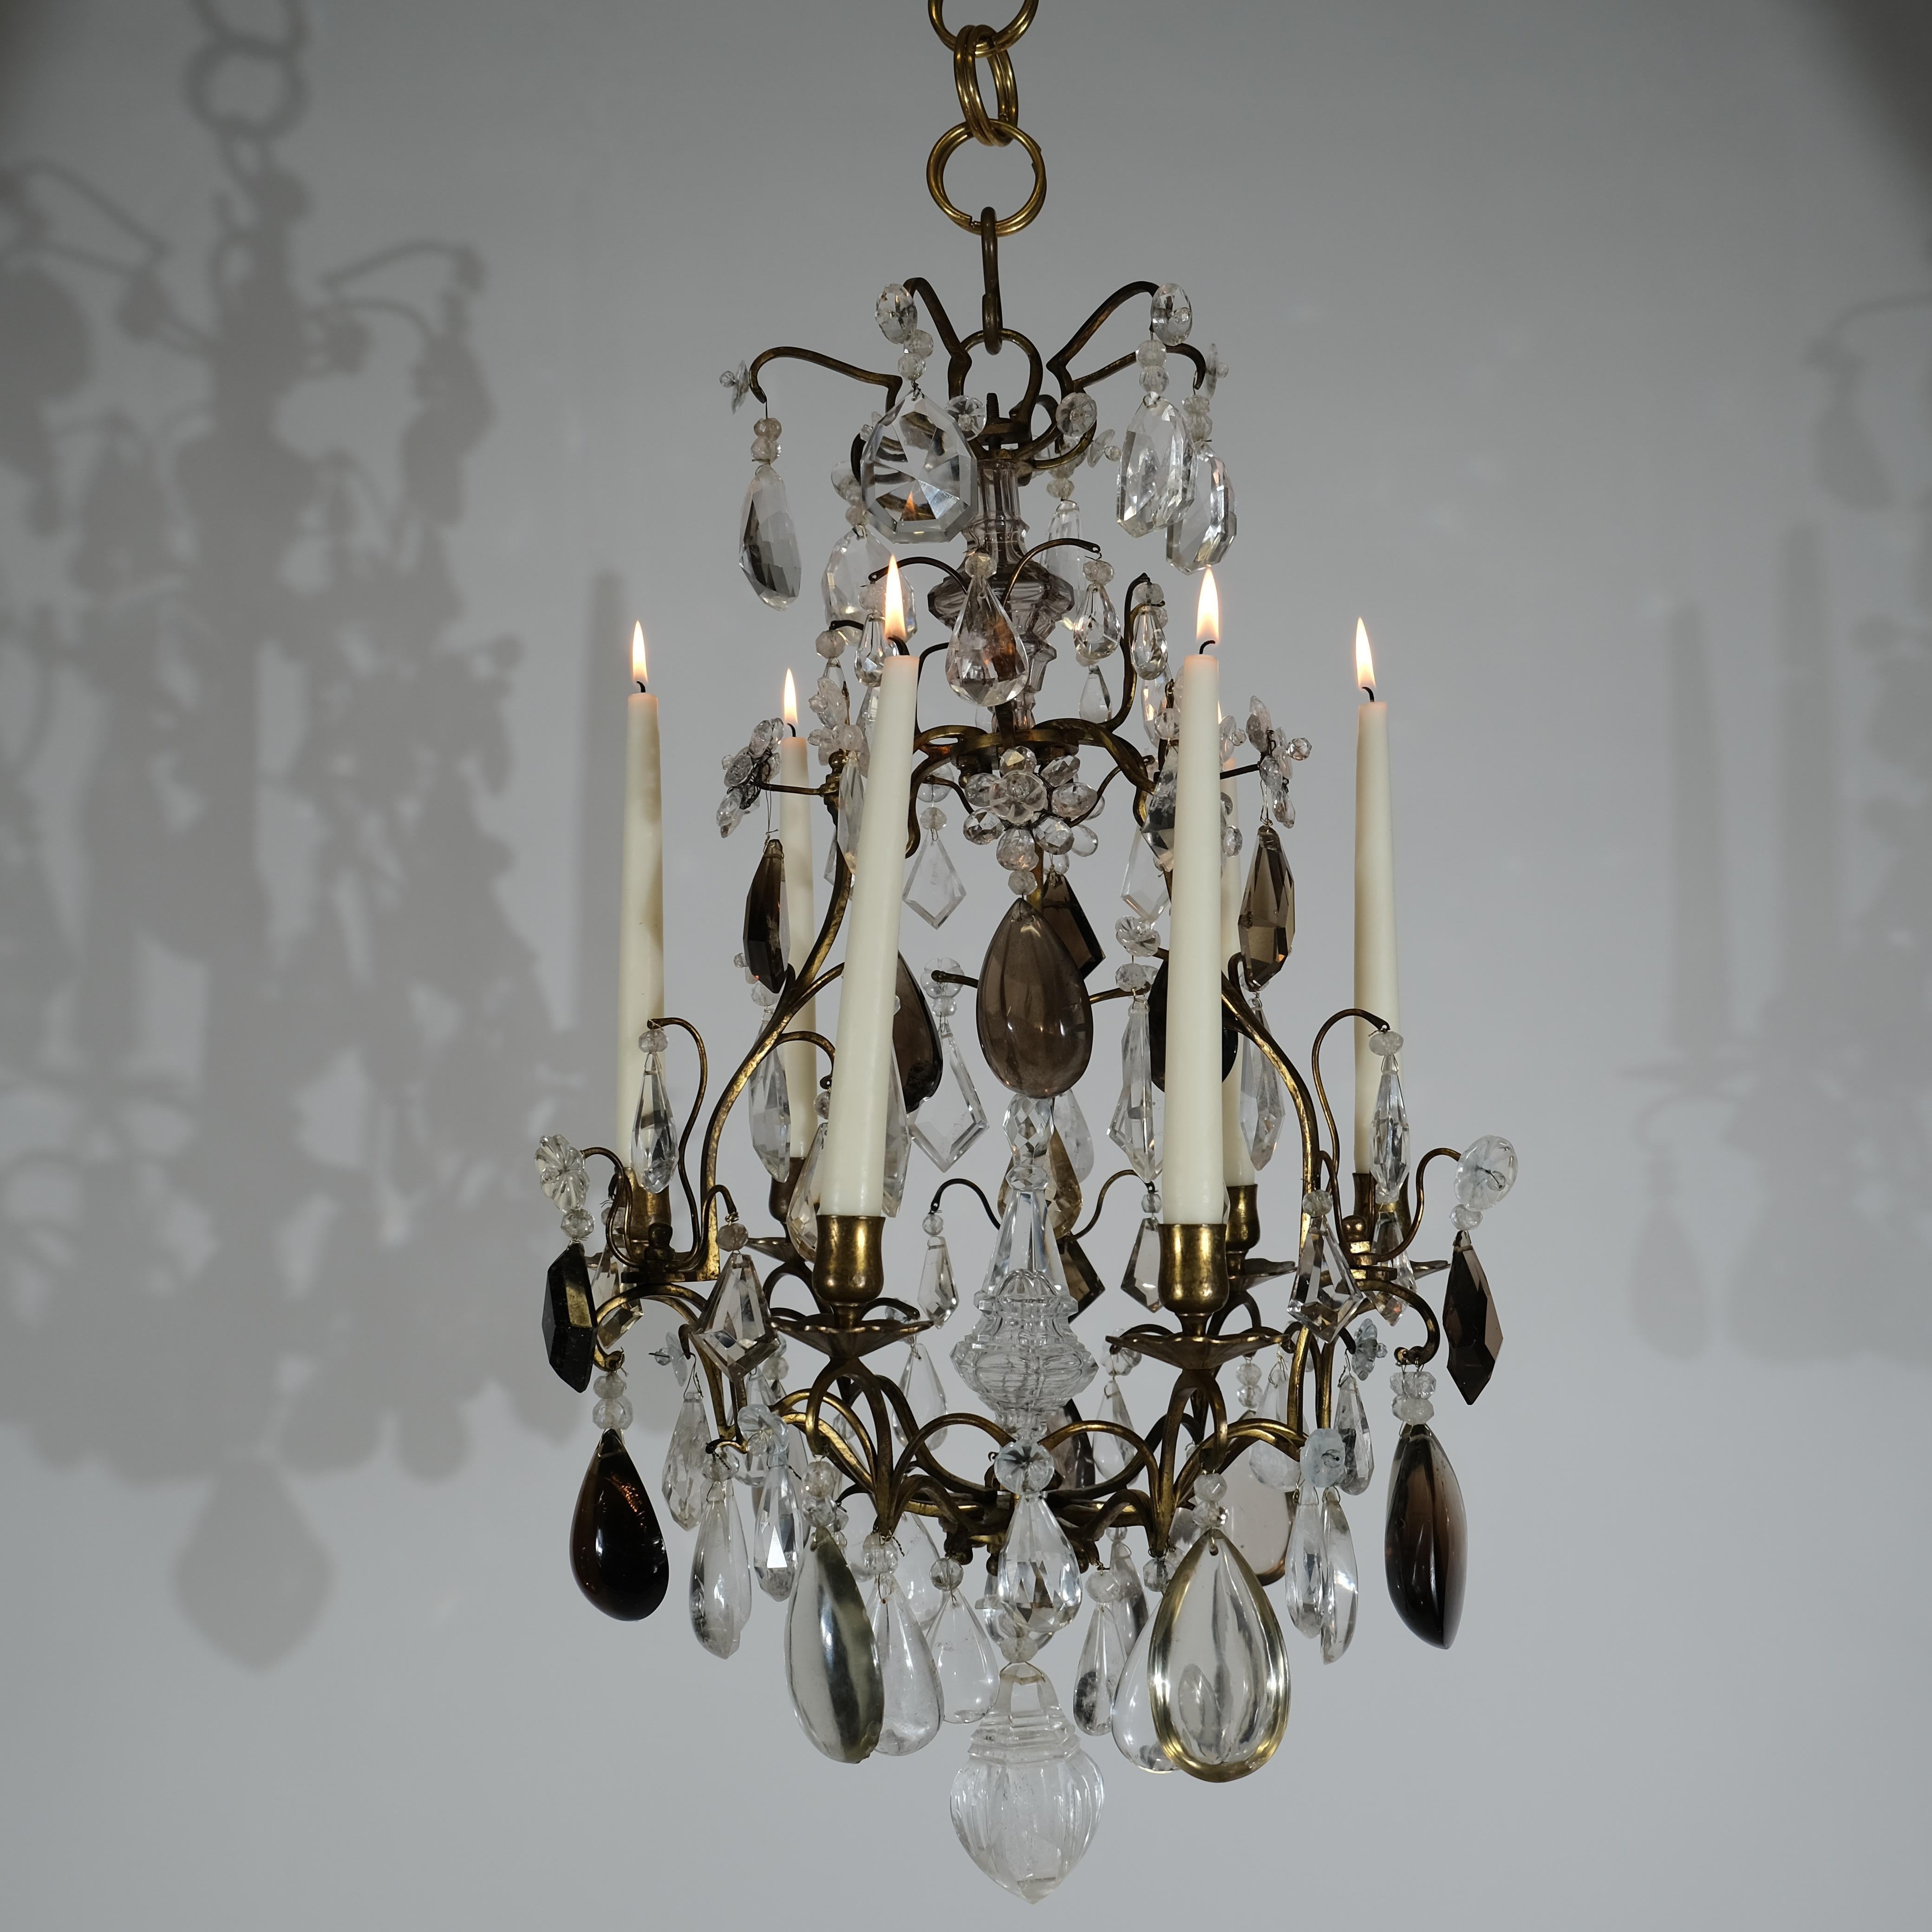 Small Baroque Style Chandelier with Exquisite Rock Crystals. 19th c. 5